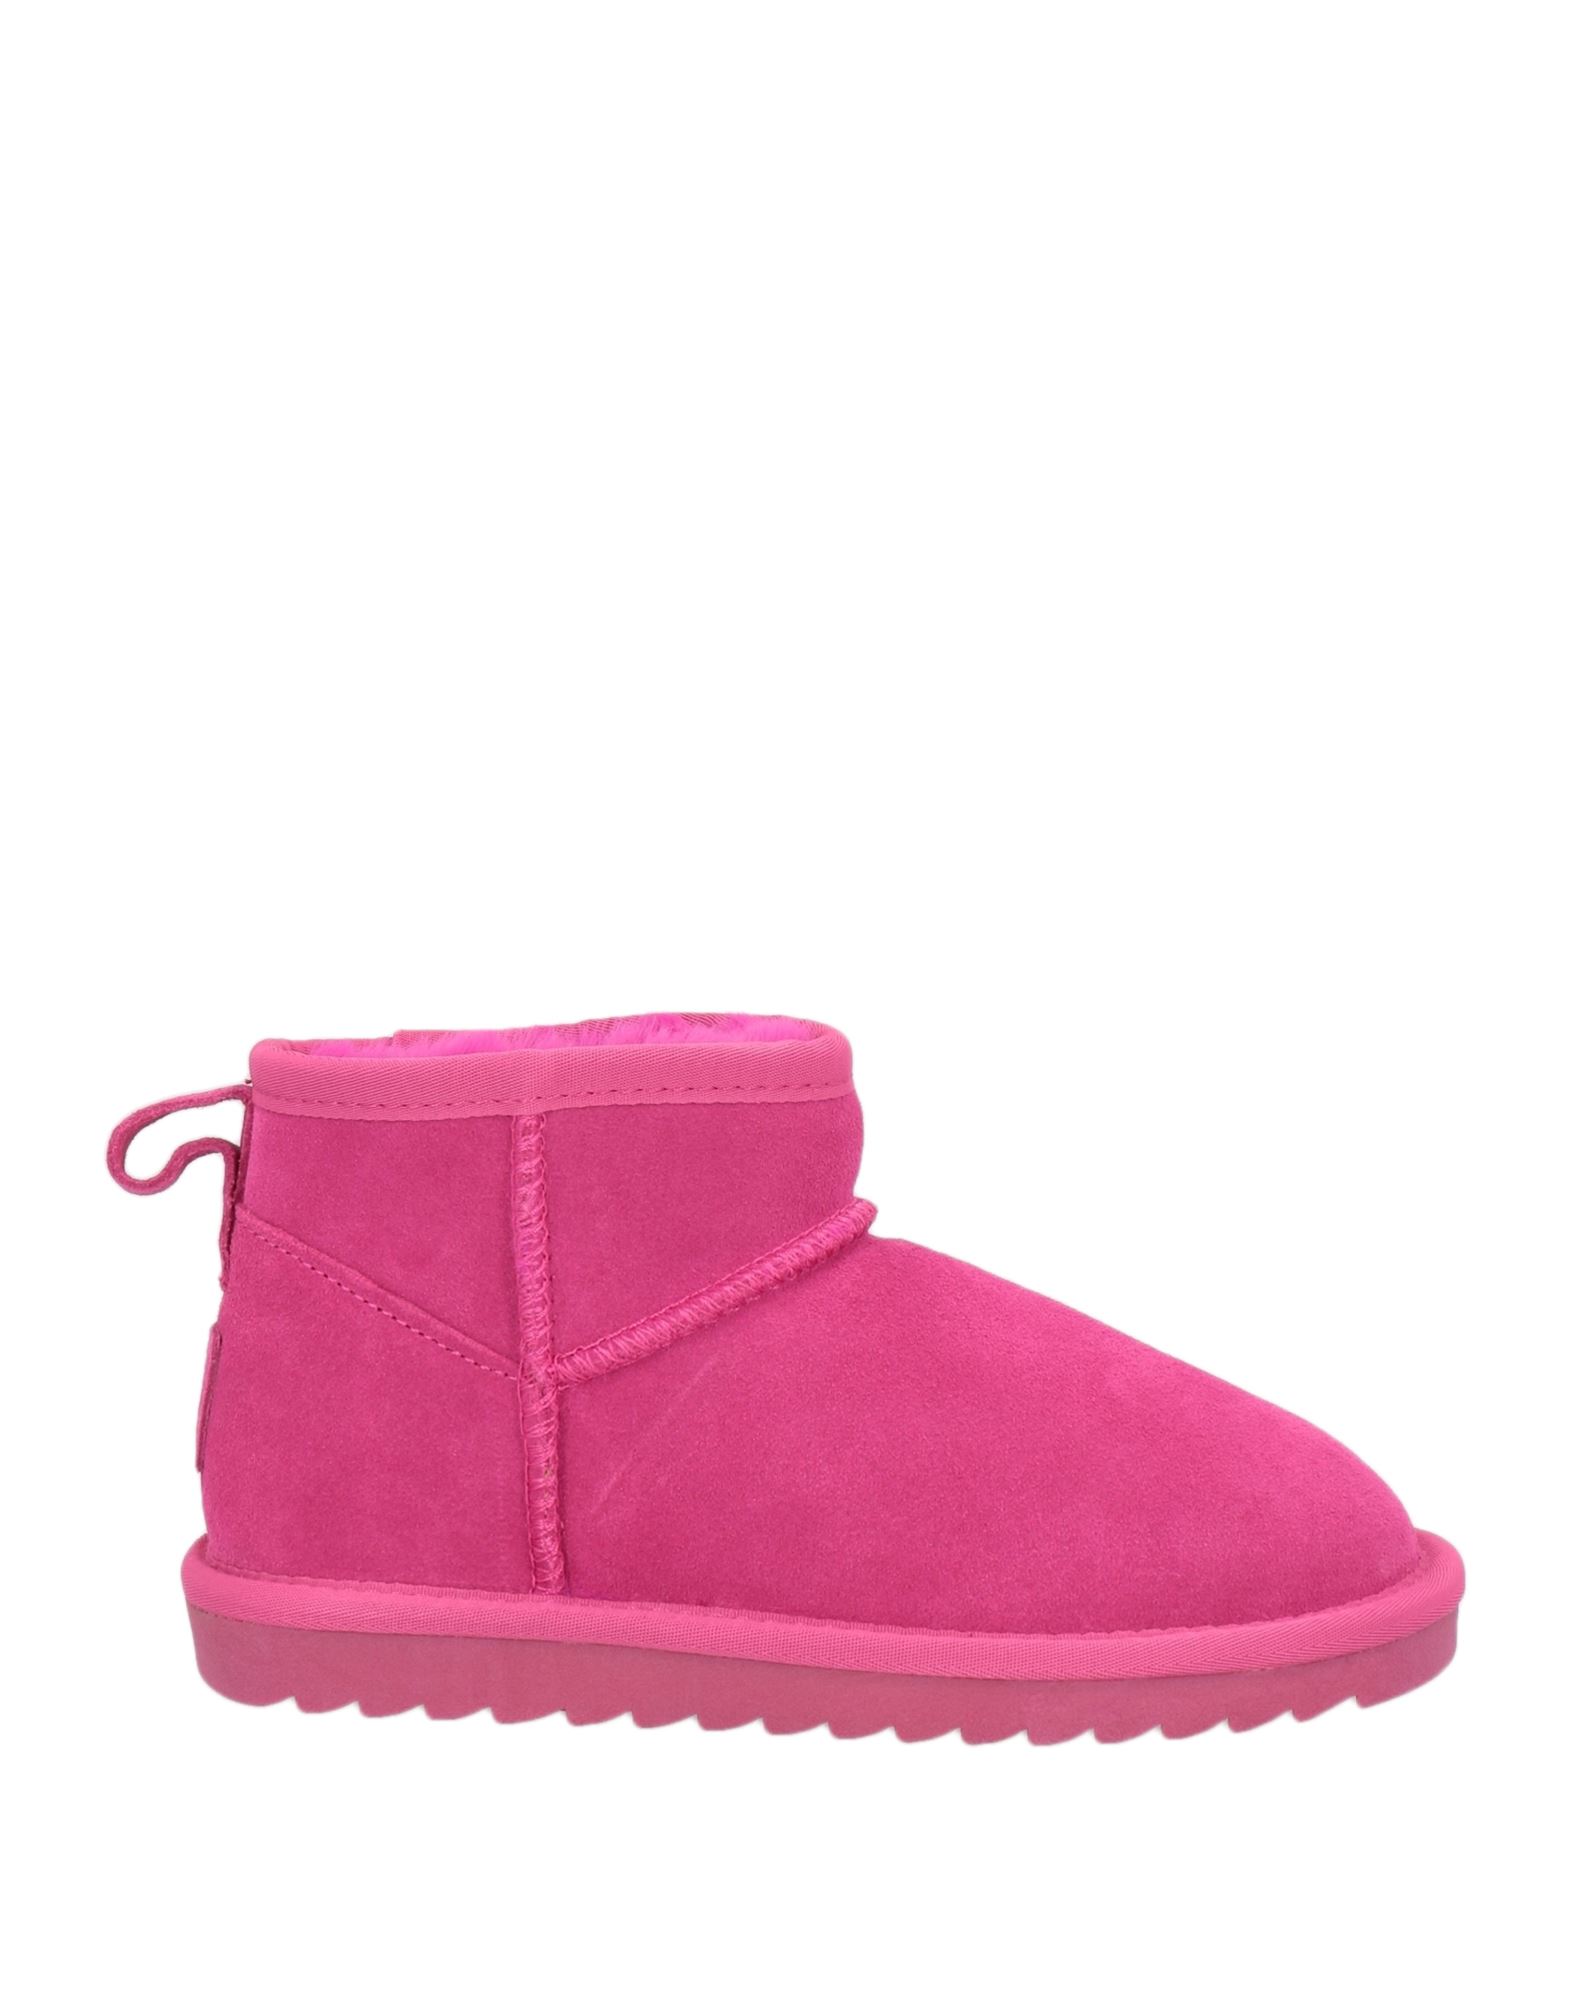 COLORS OF CALIFORNIA Stiefelette Kinder Fuchsia von COLORS OF CALIFORNIA